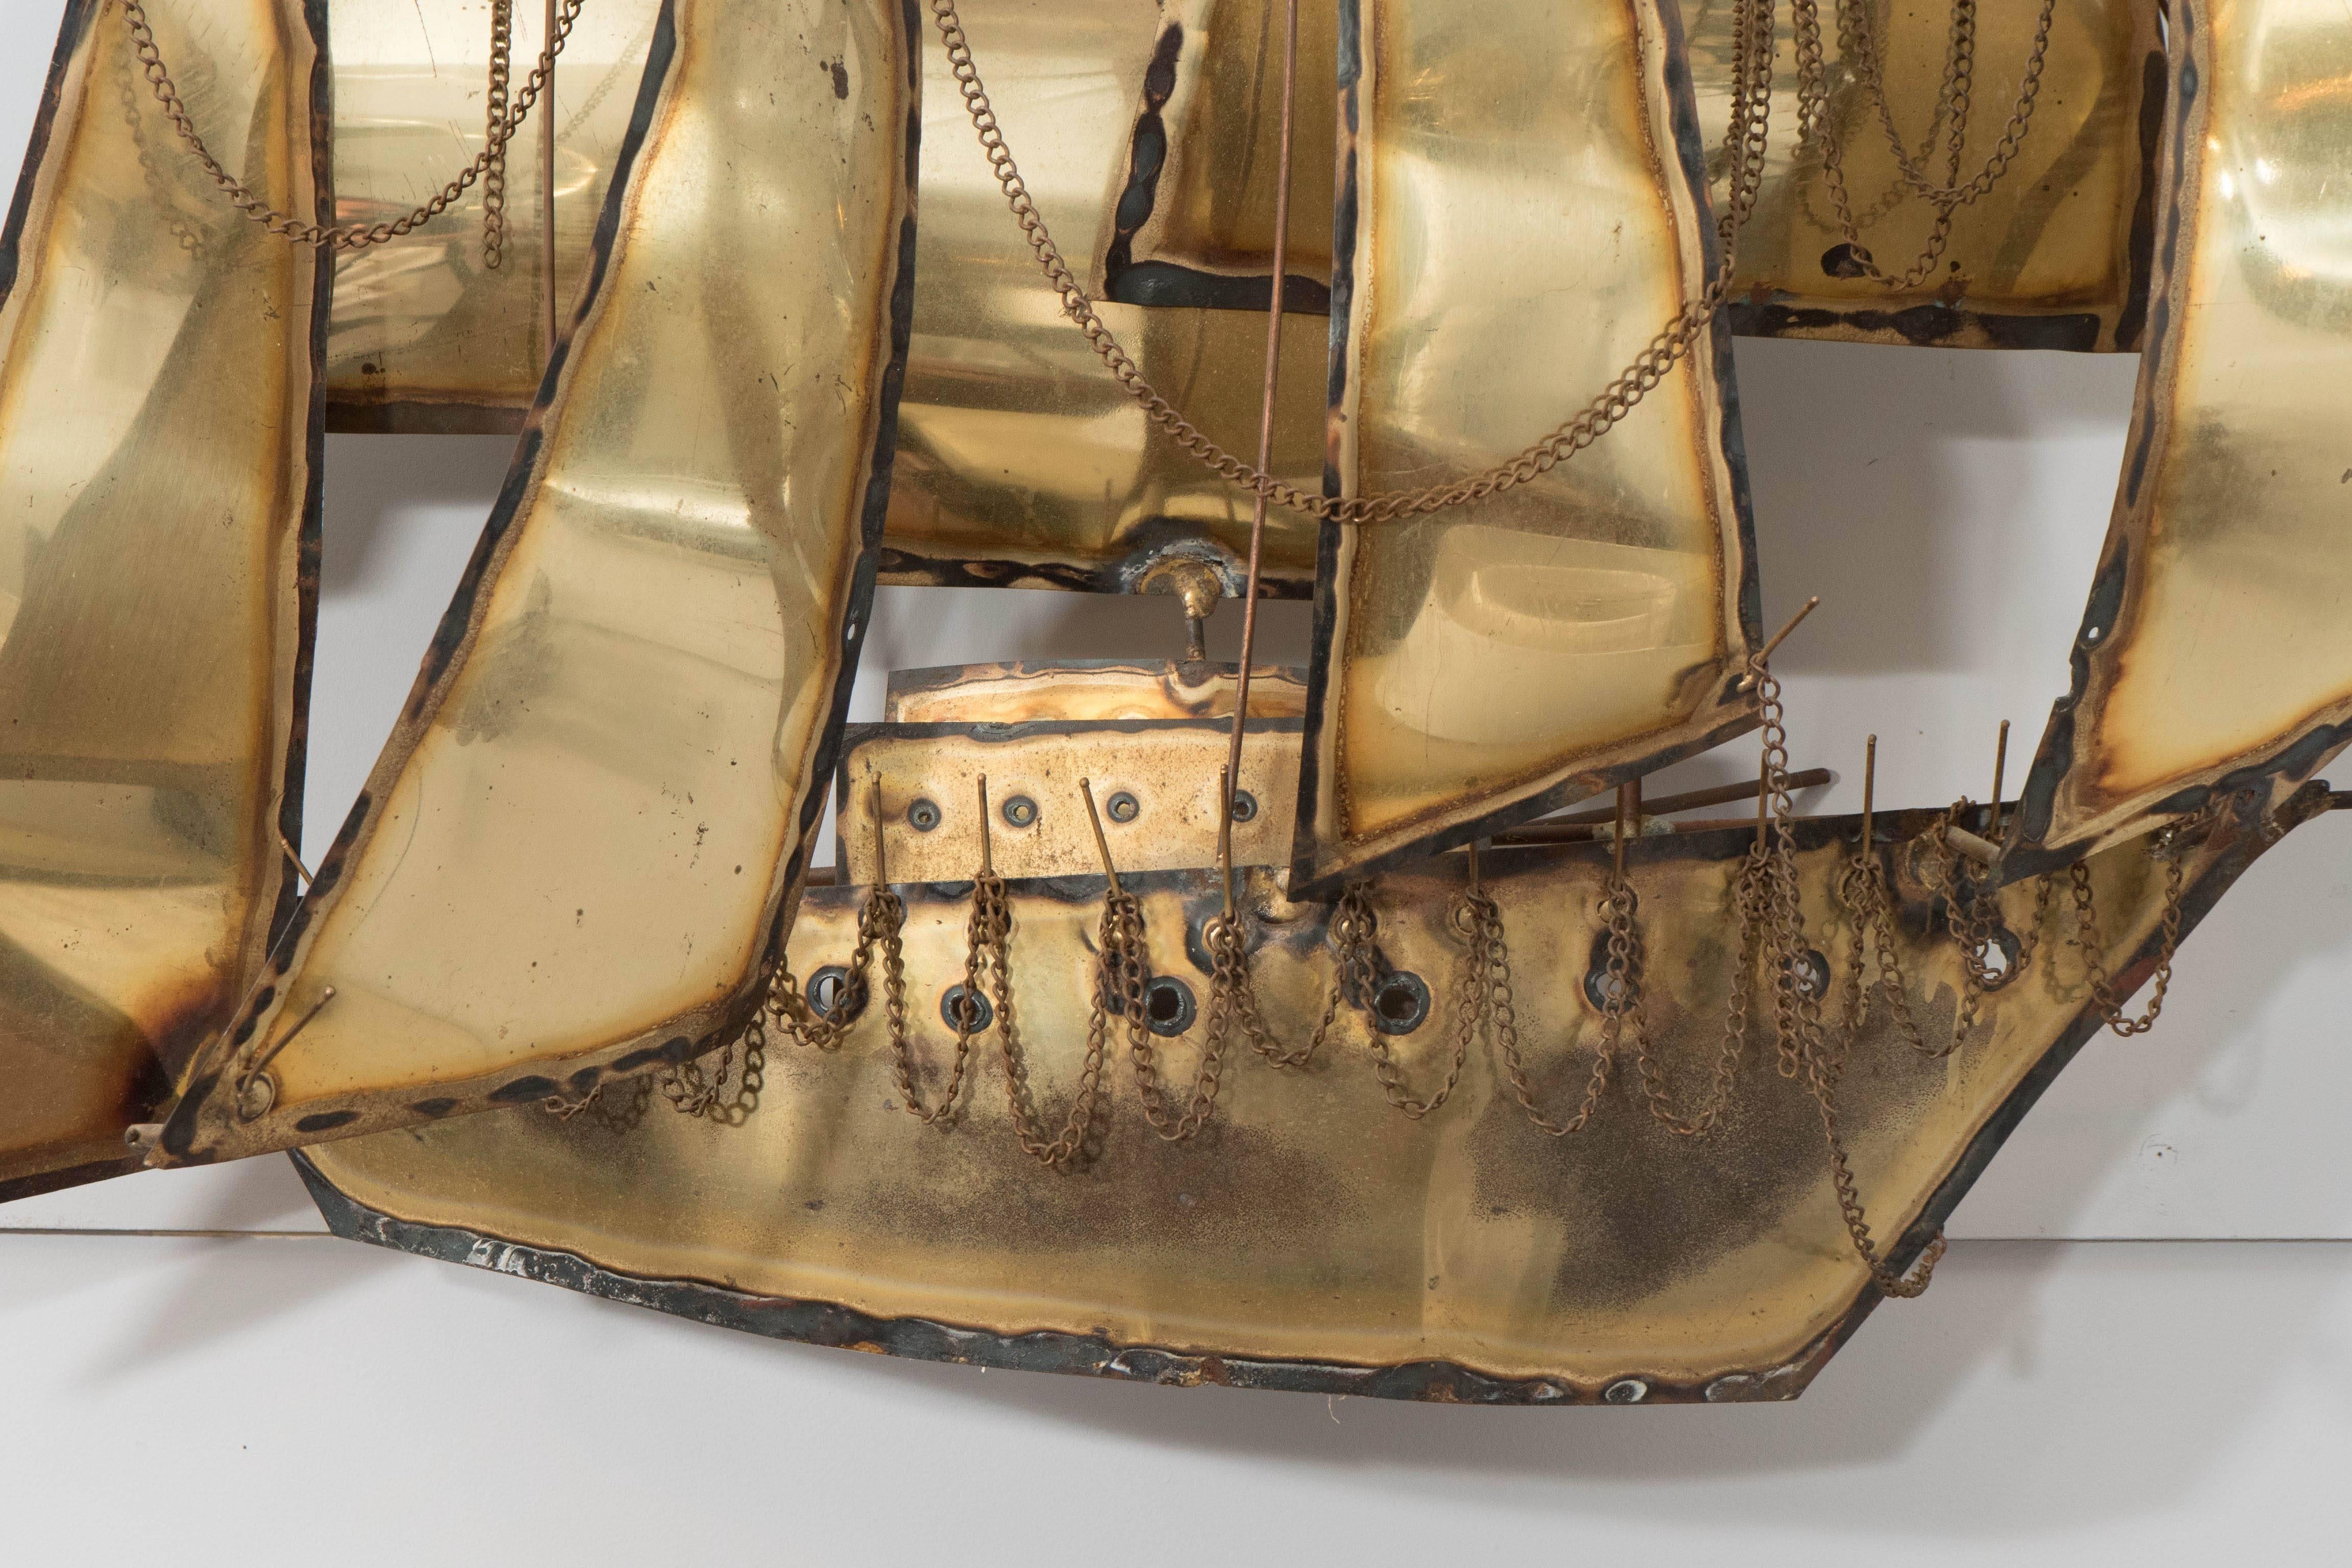 A 1960s sculptural wall hanging, designed in the Curtis Jere Brutalist manner, composed of torch cut and soldered mixed metals, depicting an impressive sailing ship. This piece is in very good vintage condition, consistent with age and use; repairs